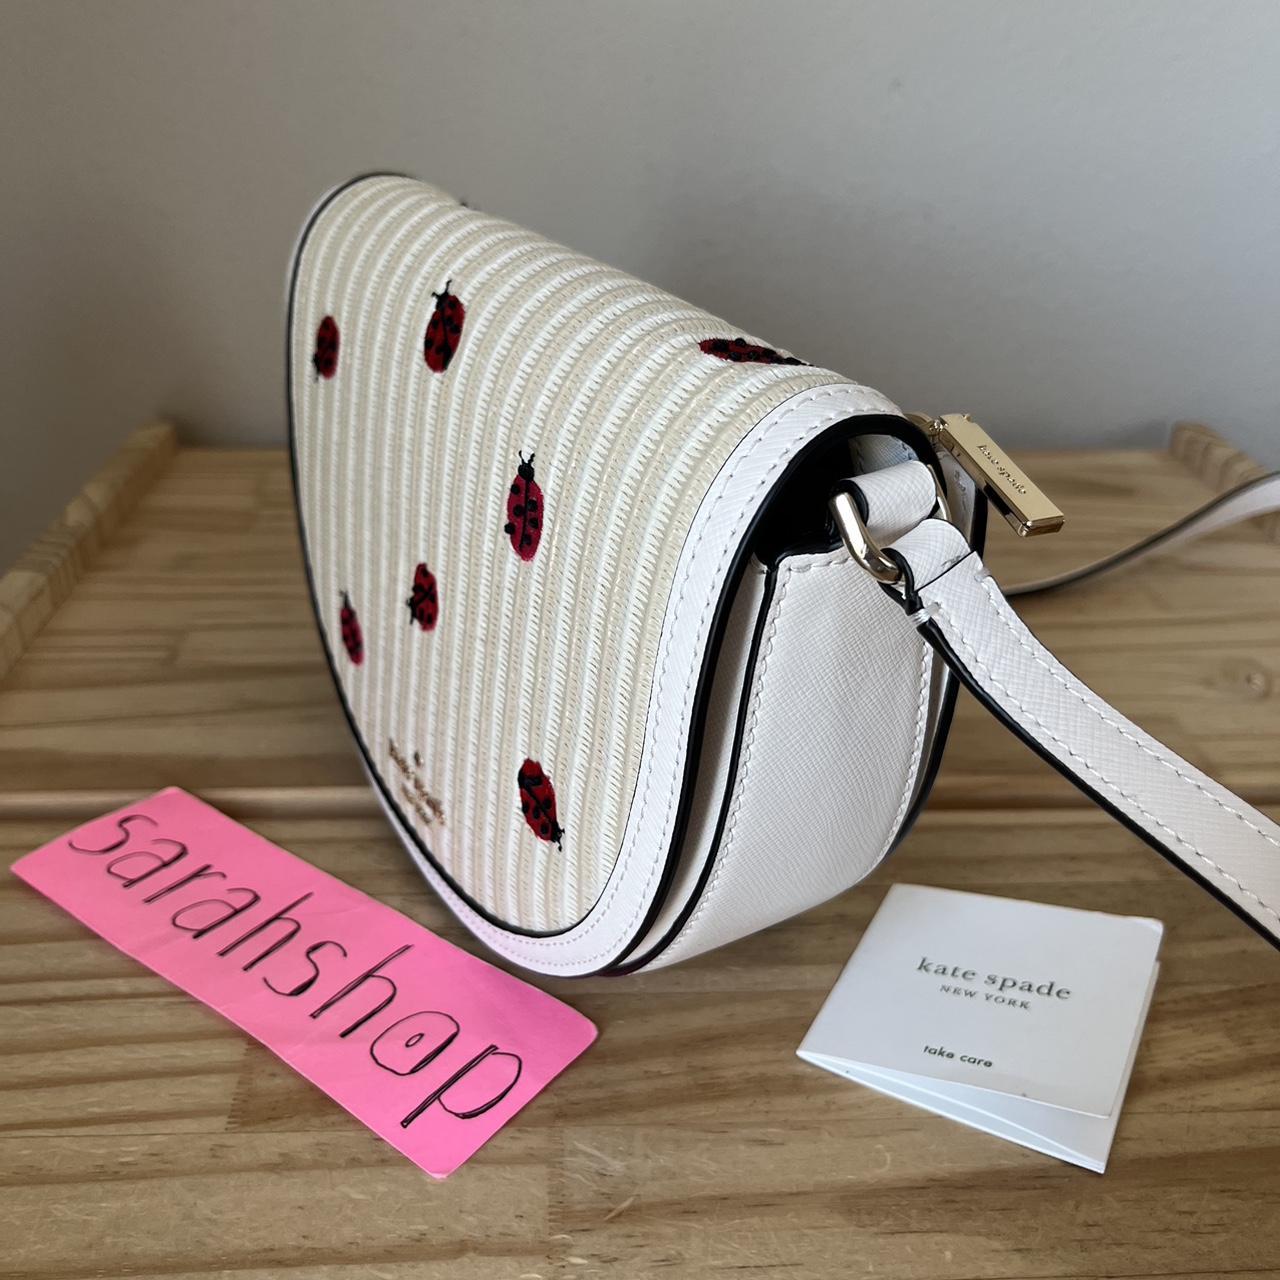 Authentic KATE SPADE Pebbled leather REVERSIBLE Open - Depop